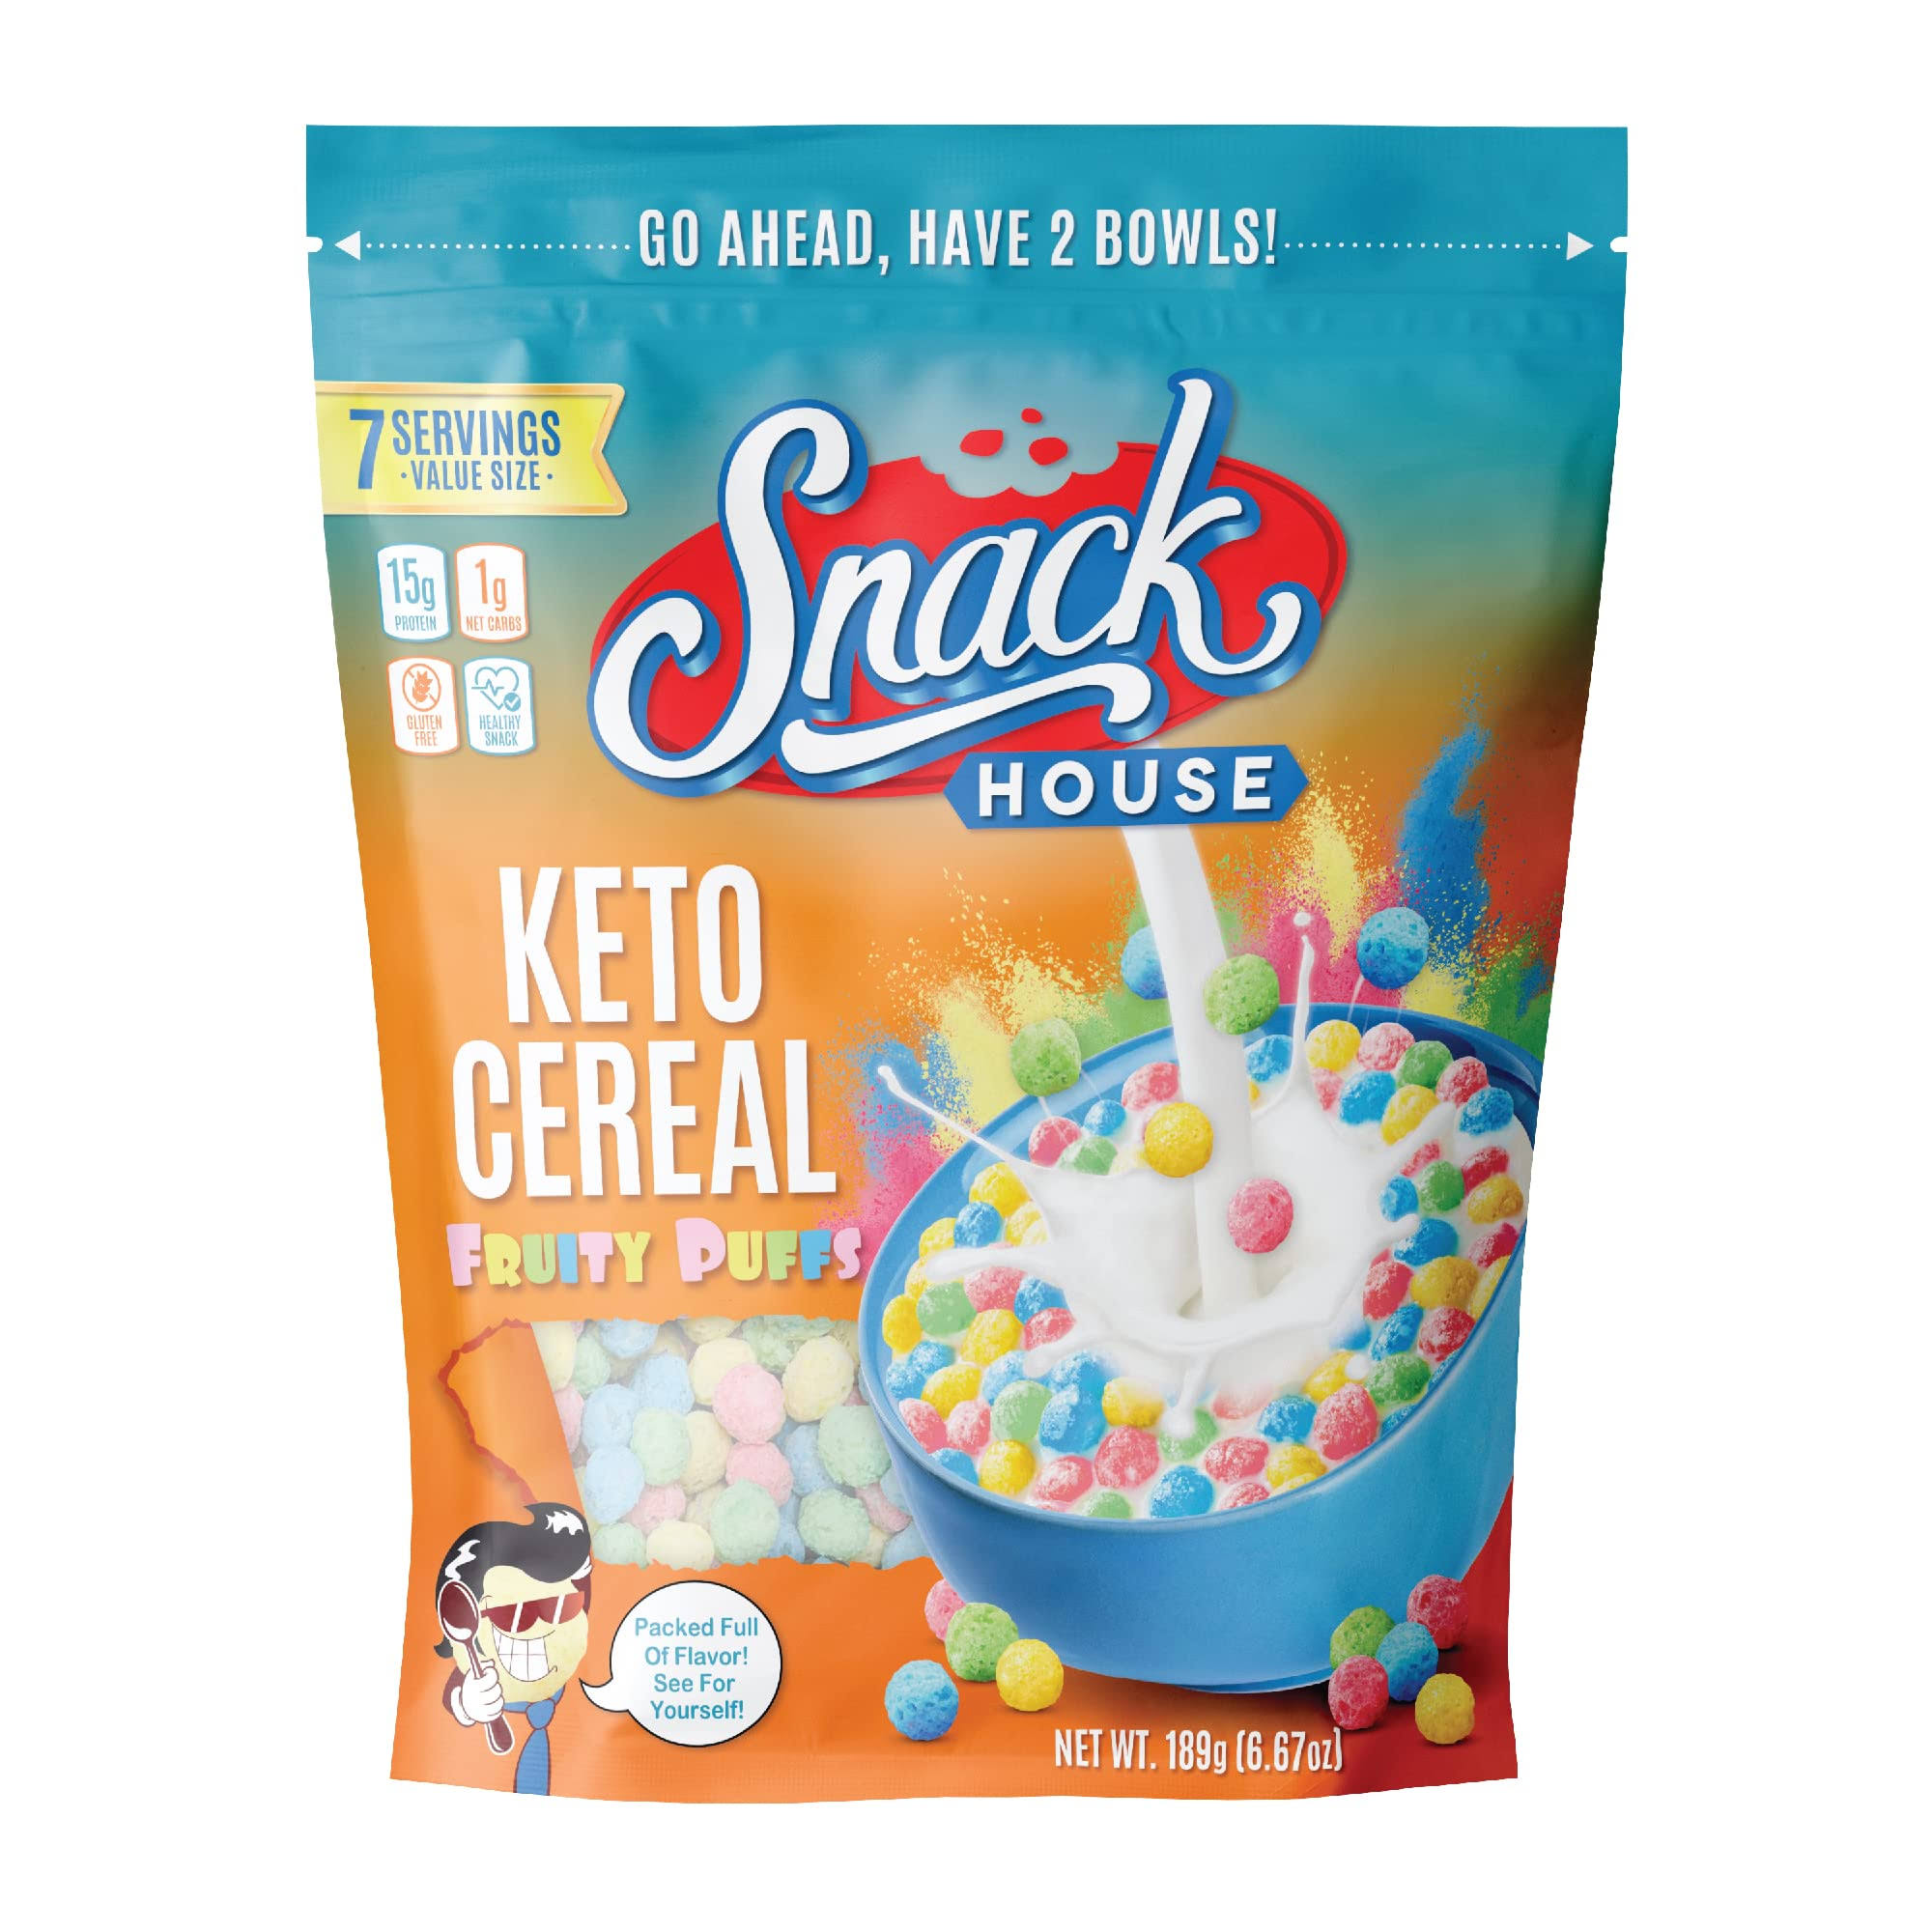 Snack House Keto Cereal - Fruity Puffs